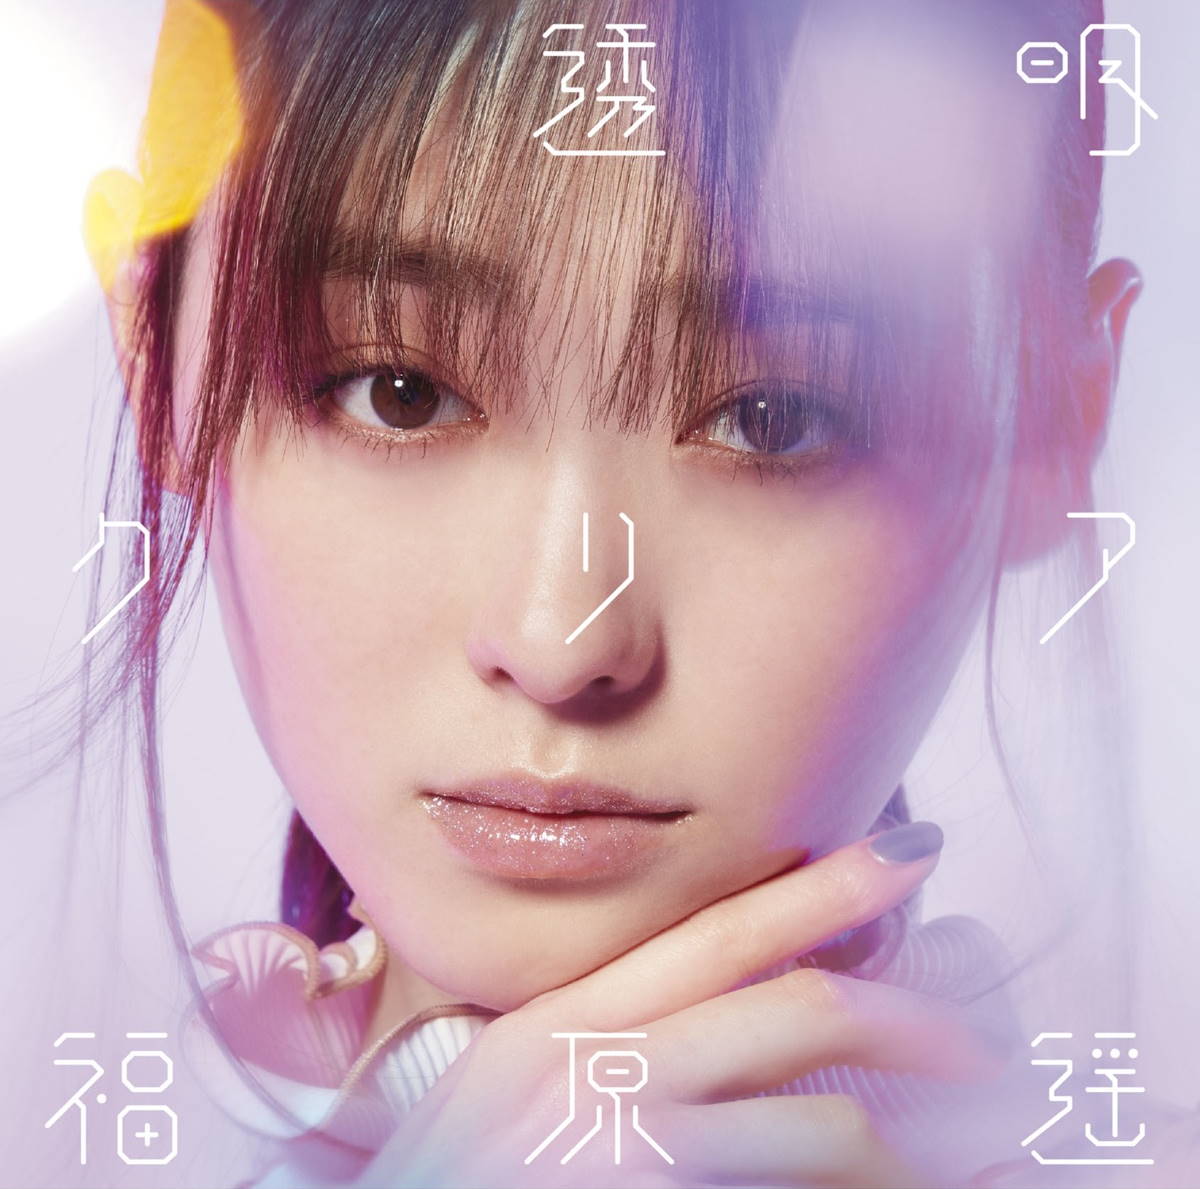 Cover art for『Haruka Fukuhara - 透明クリア』from the release『Toumei Clear